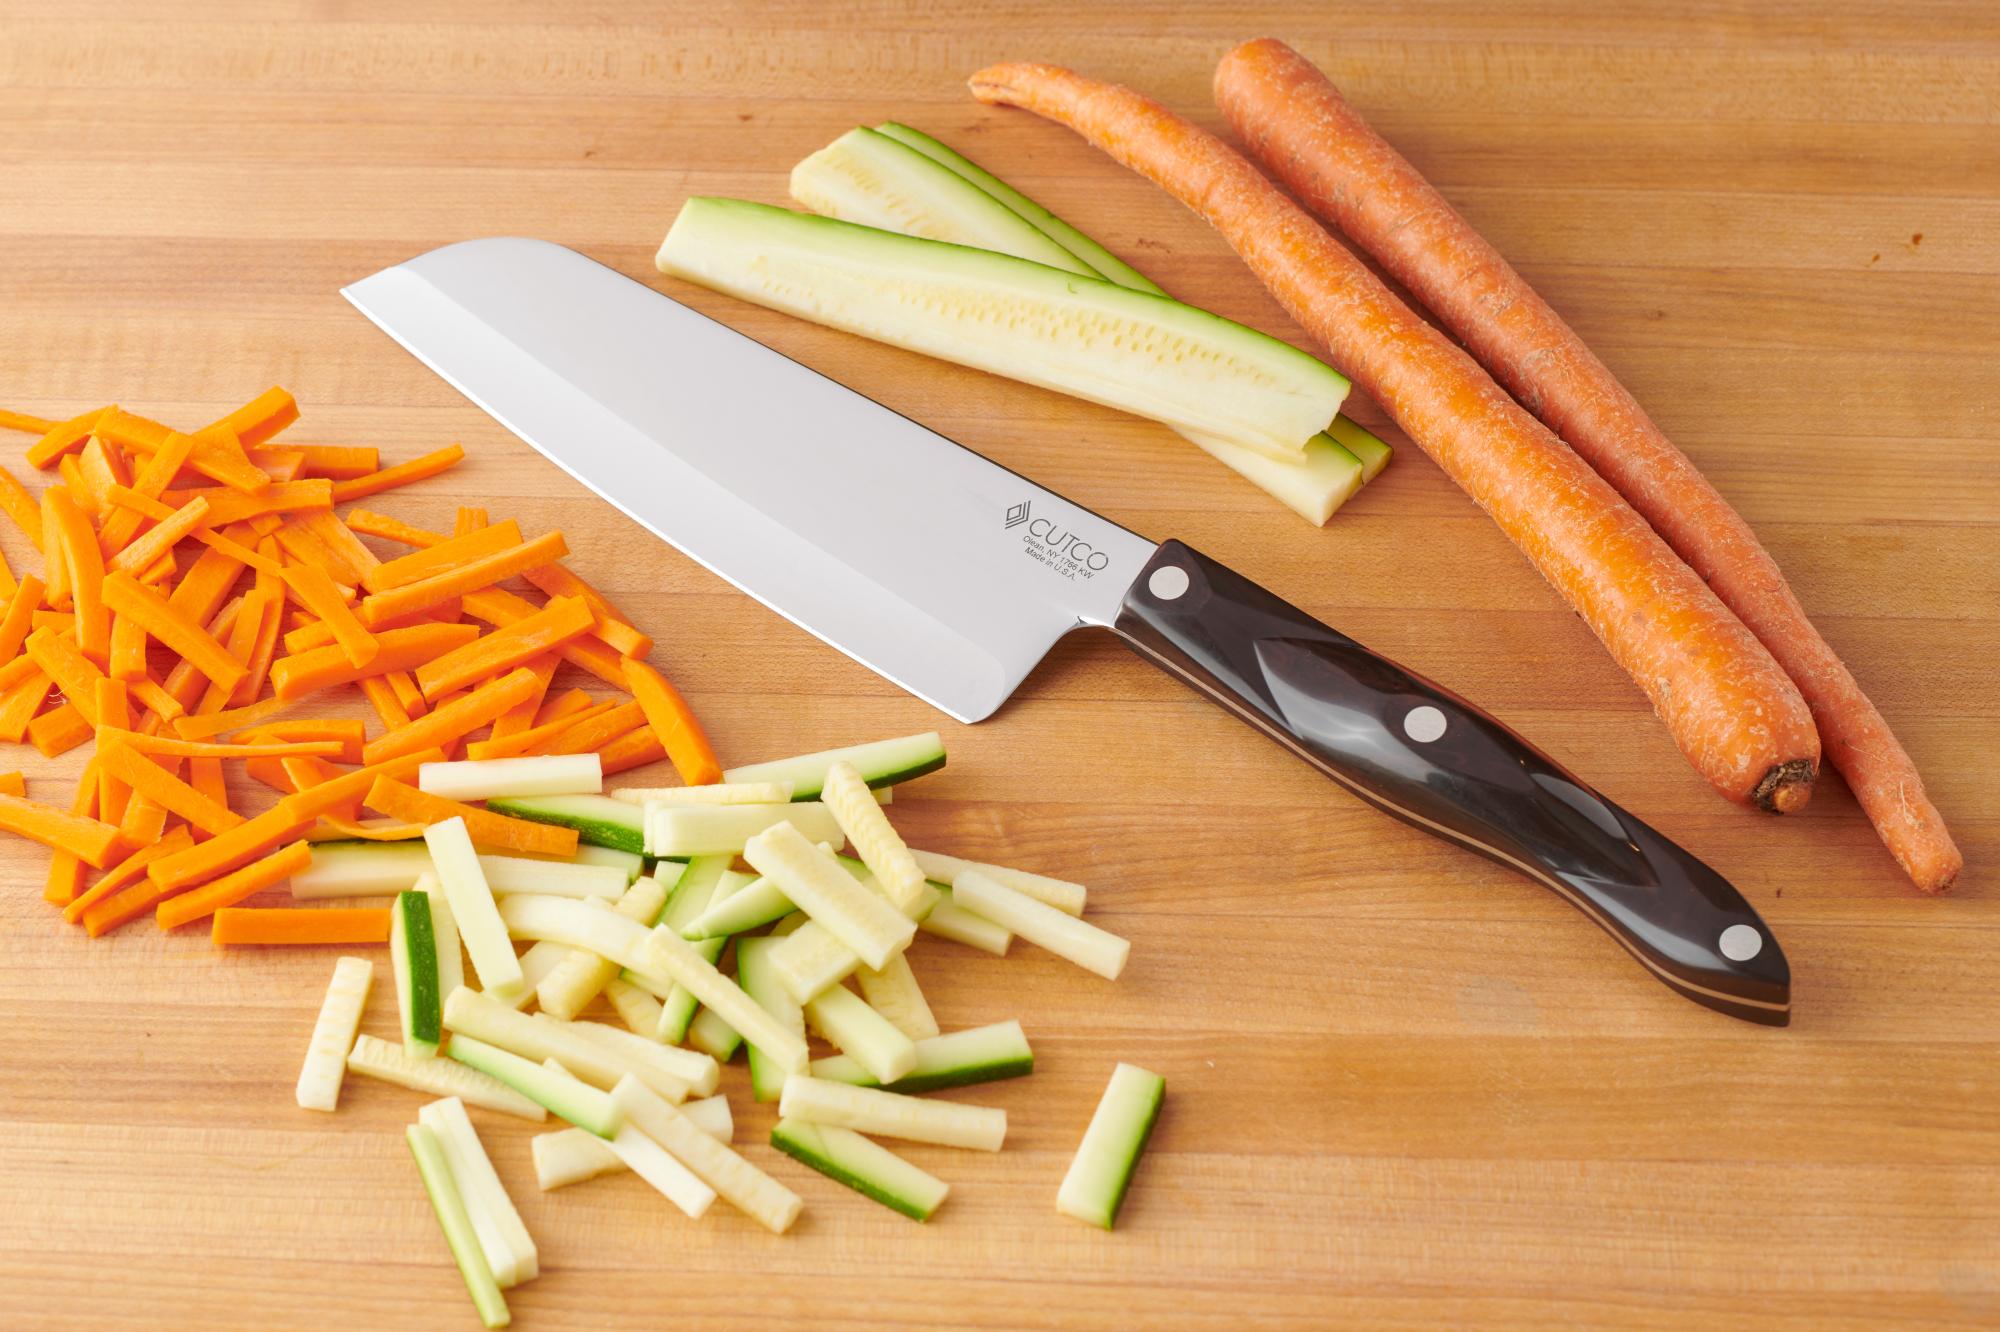 Using the Santoku to cut the zucchini and carrots.